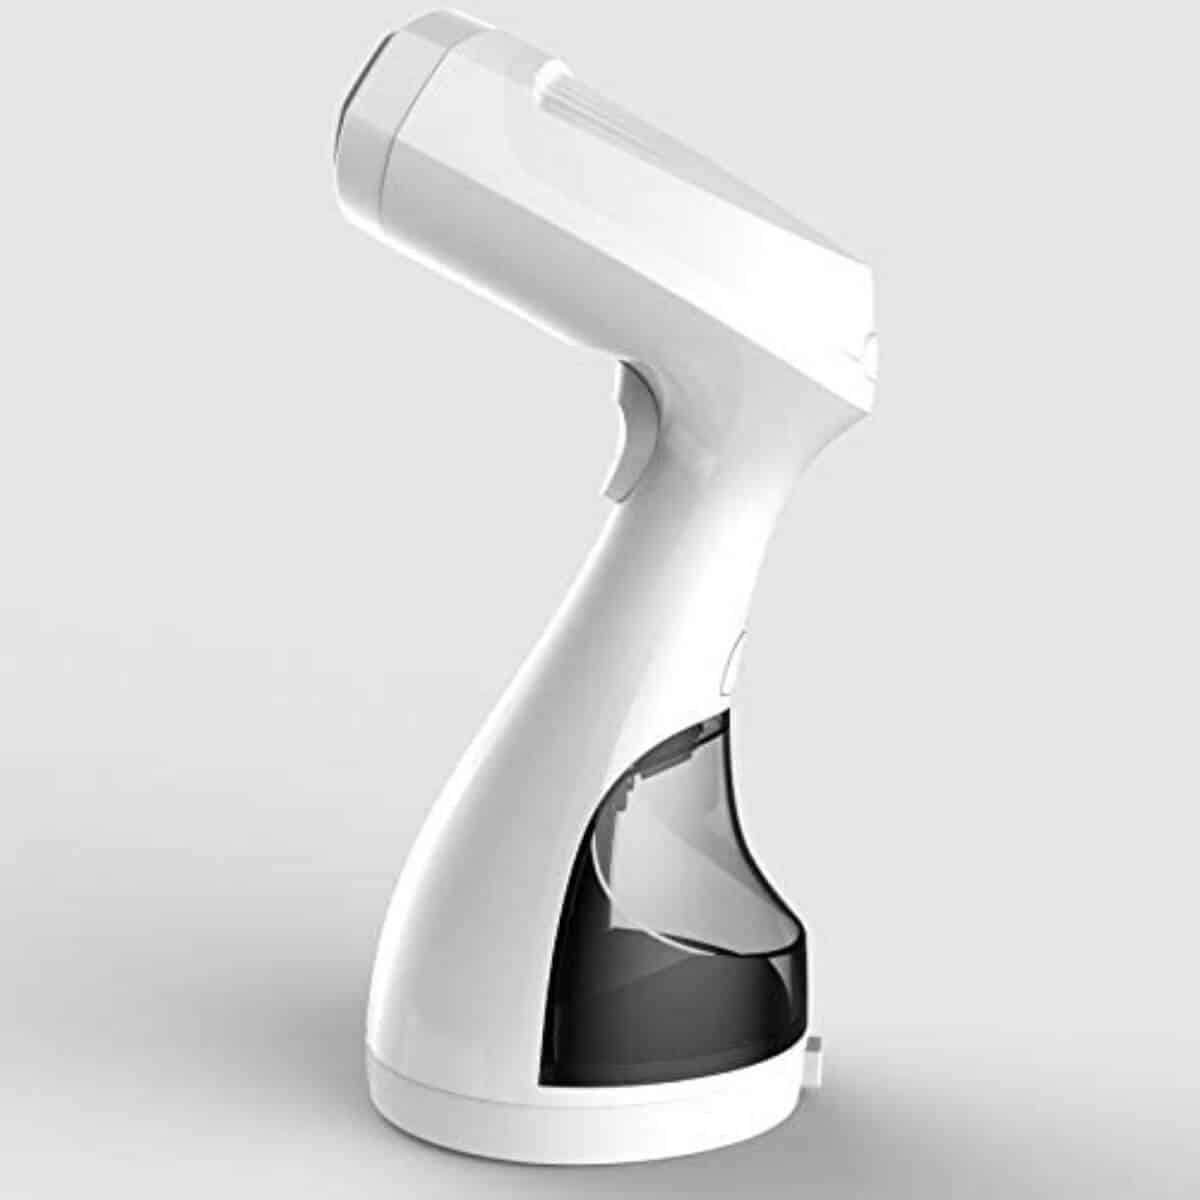 White and grey clothes steamer.